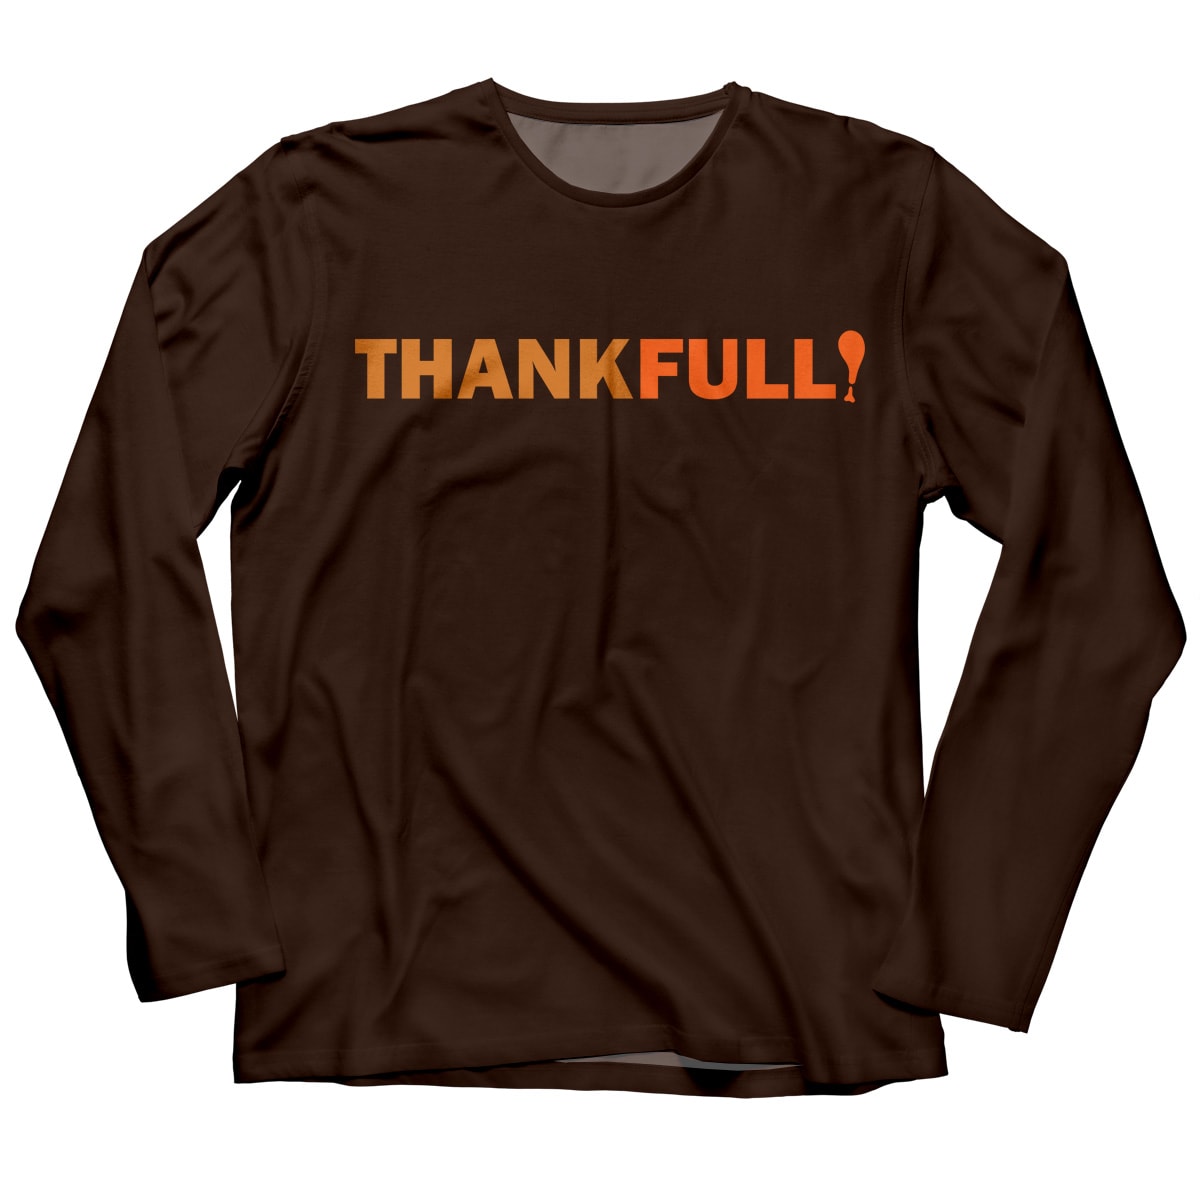 Boys brown thanksgiving tee shirt with name - Wimziy&Co.